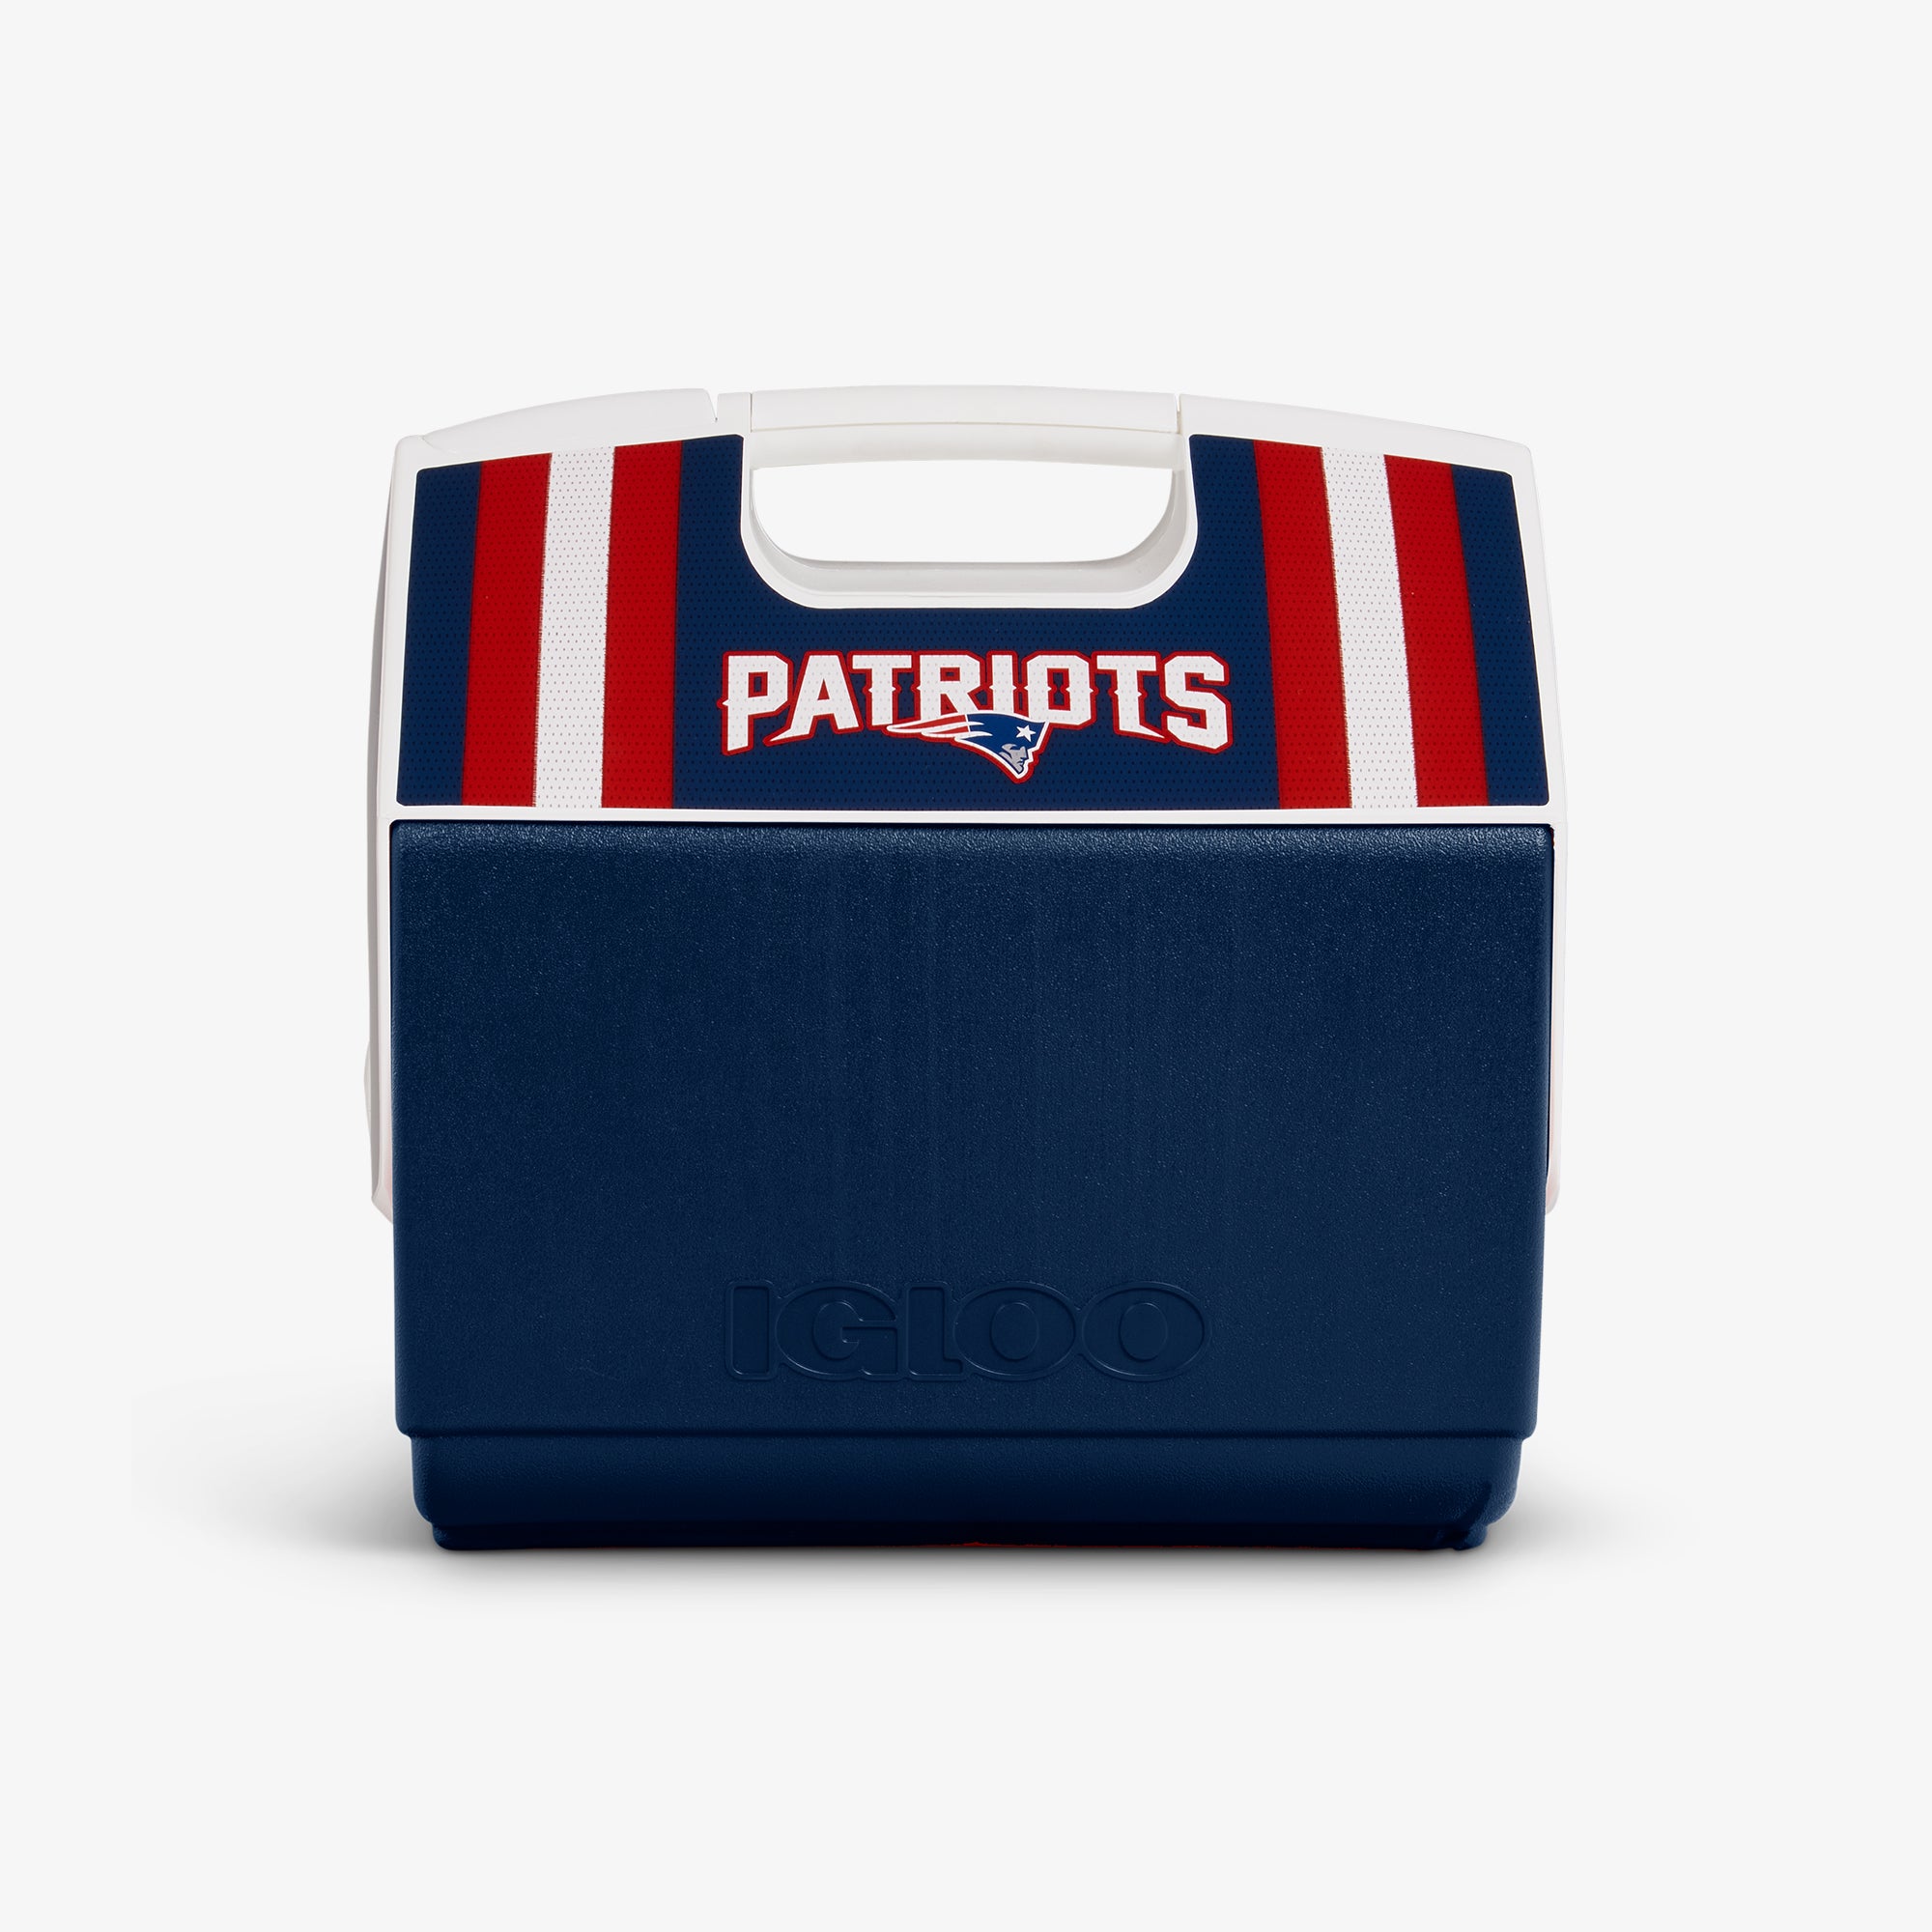 Patriot Coolers Patriot Cooler Tote Bag 8 Gallon (Beach Day Cooler)